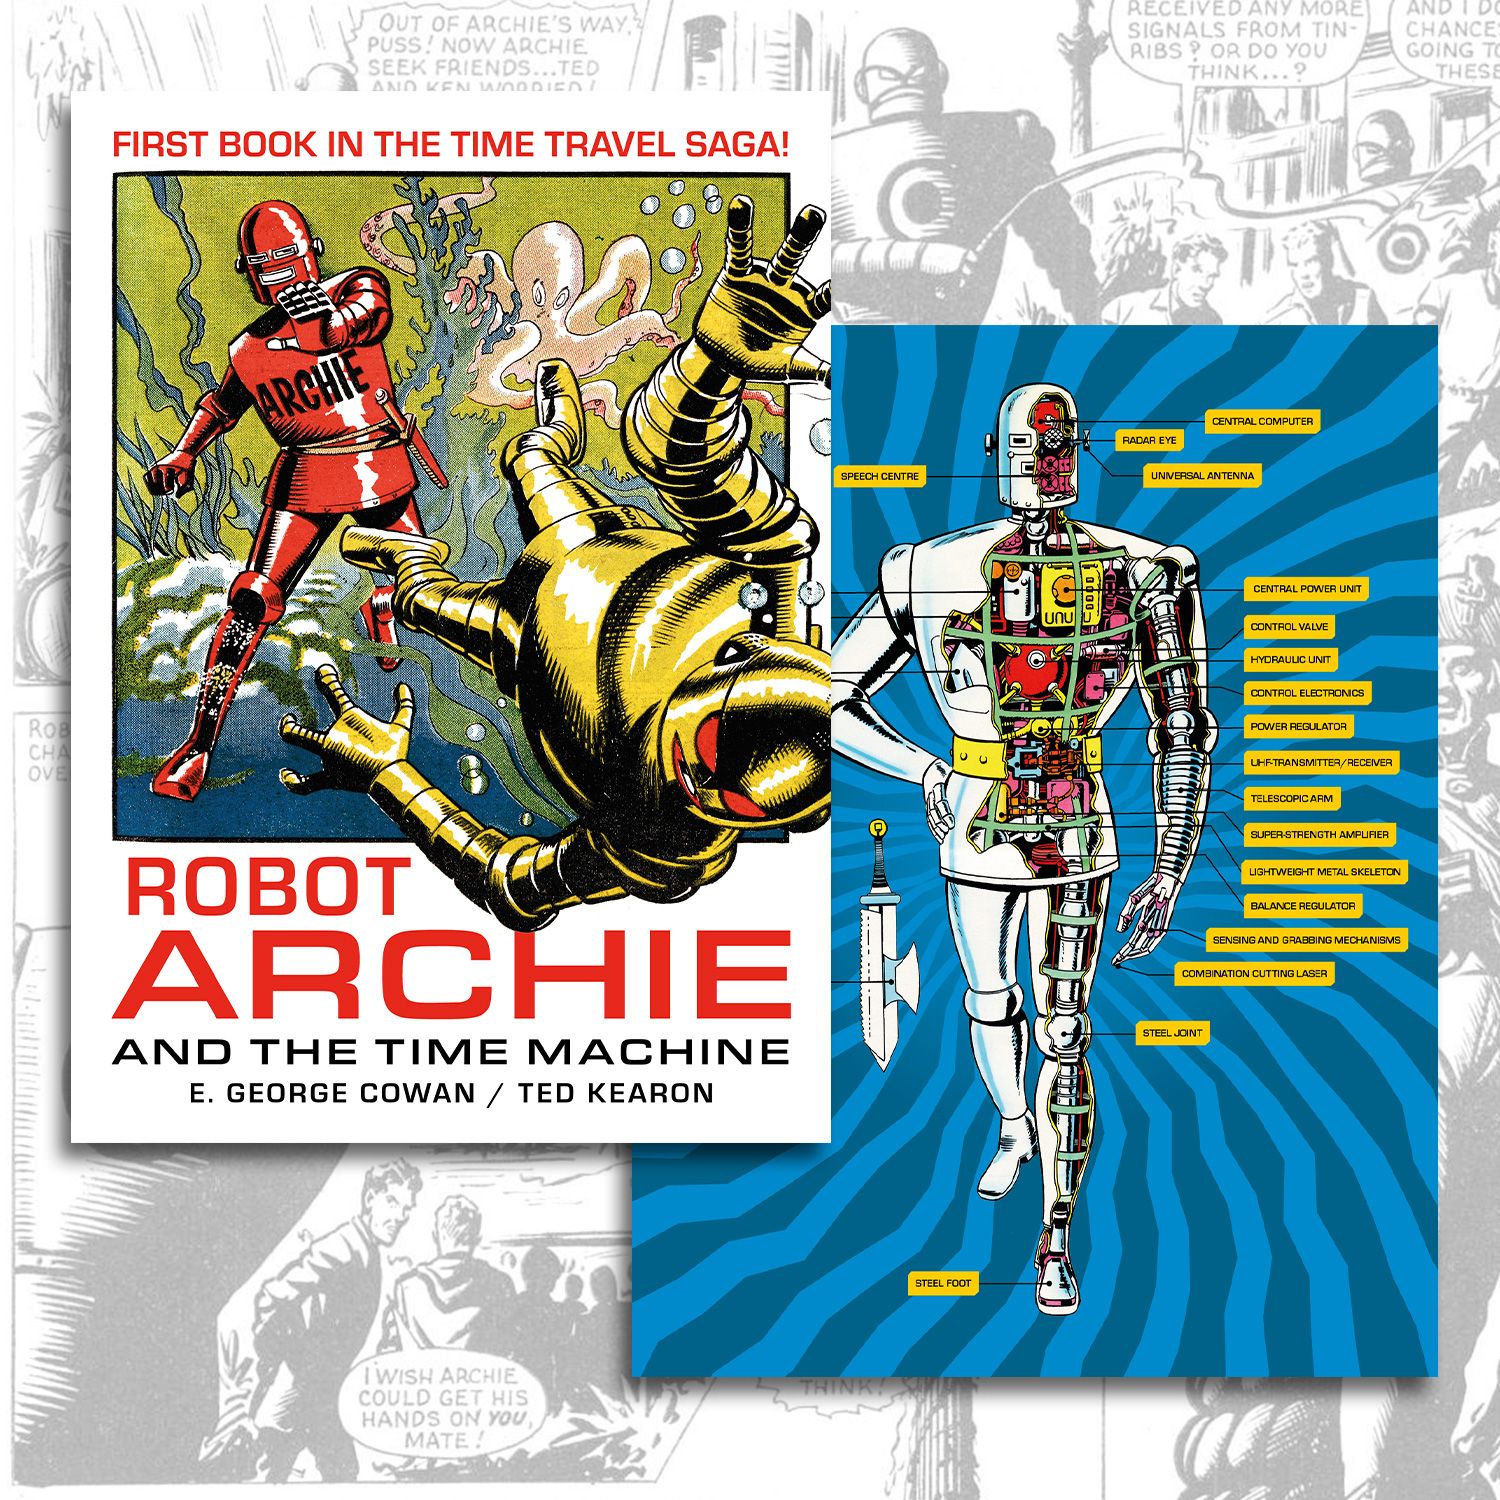 Robot Archie and The Time Machine – pre-order now